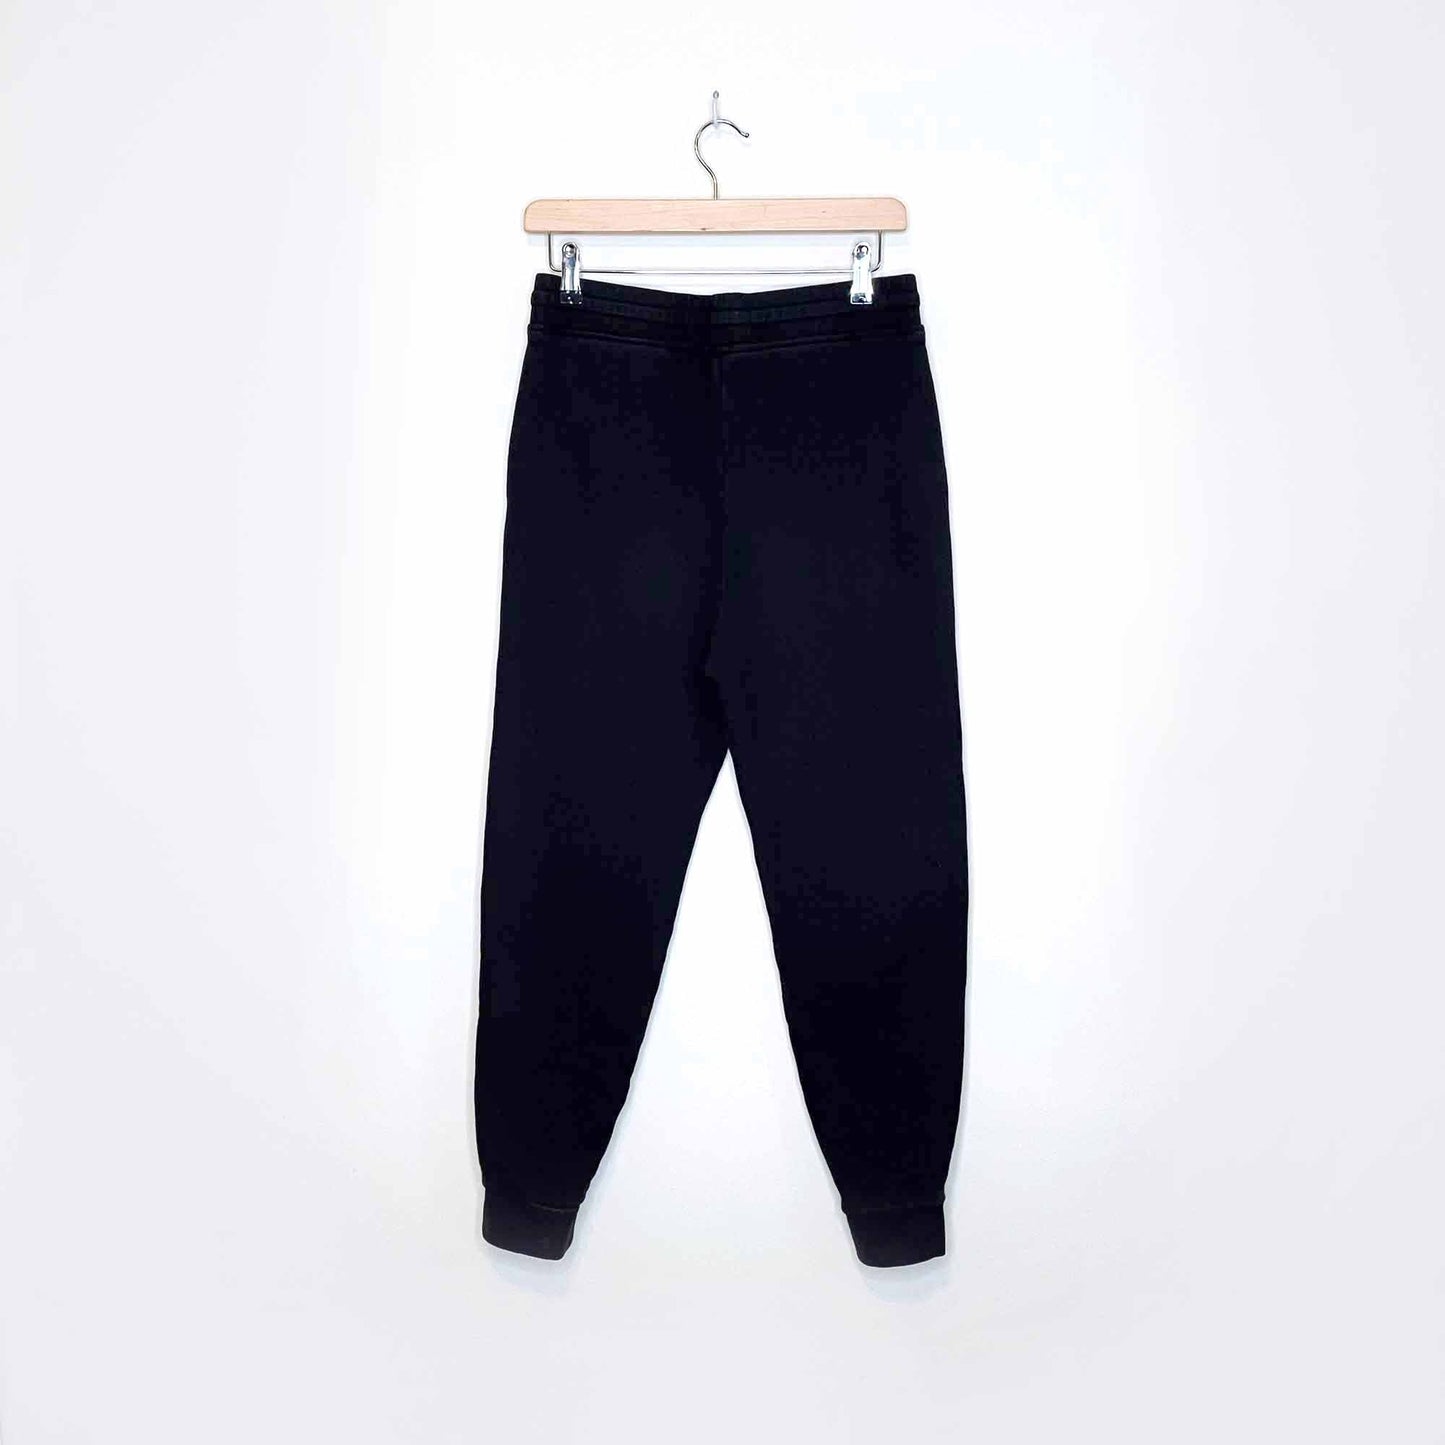 everlane the classic french terry high rise sweatpants - size small